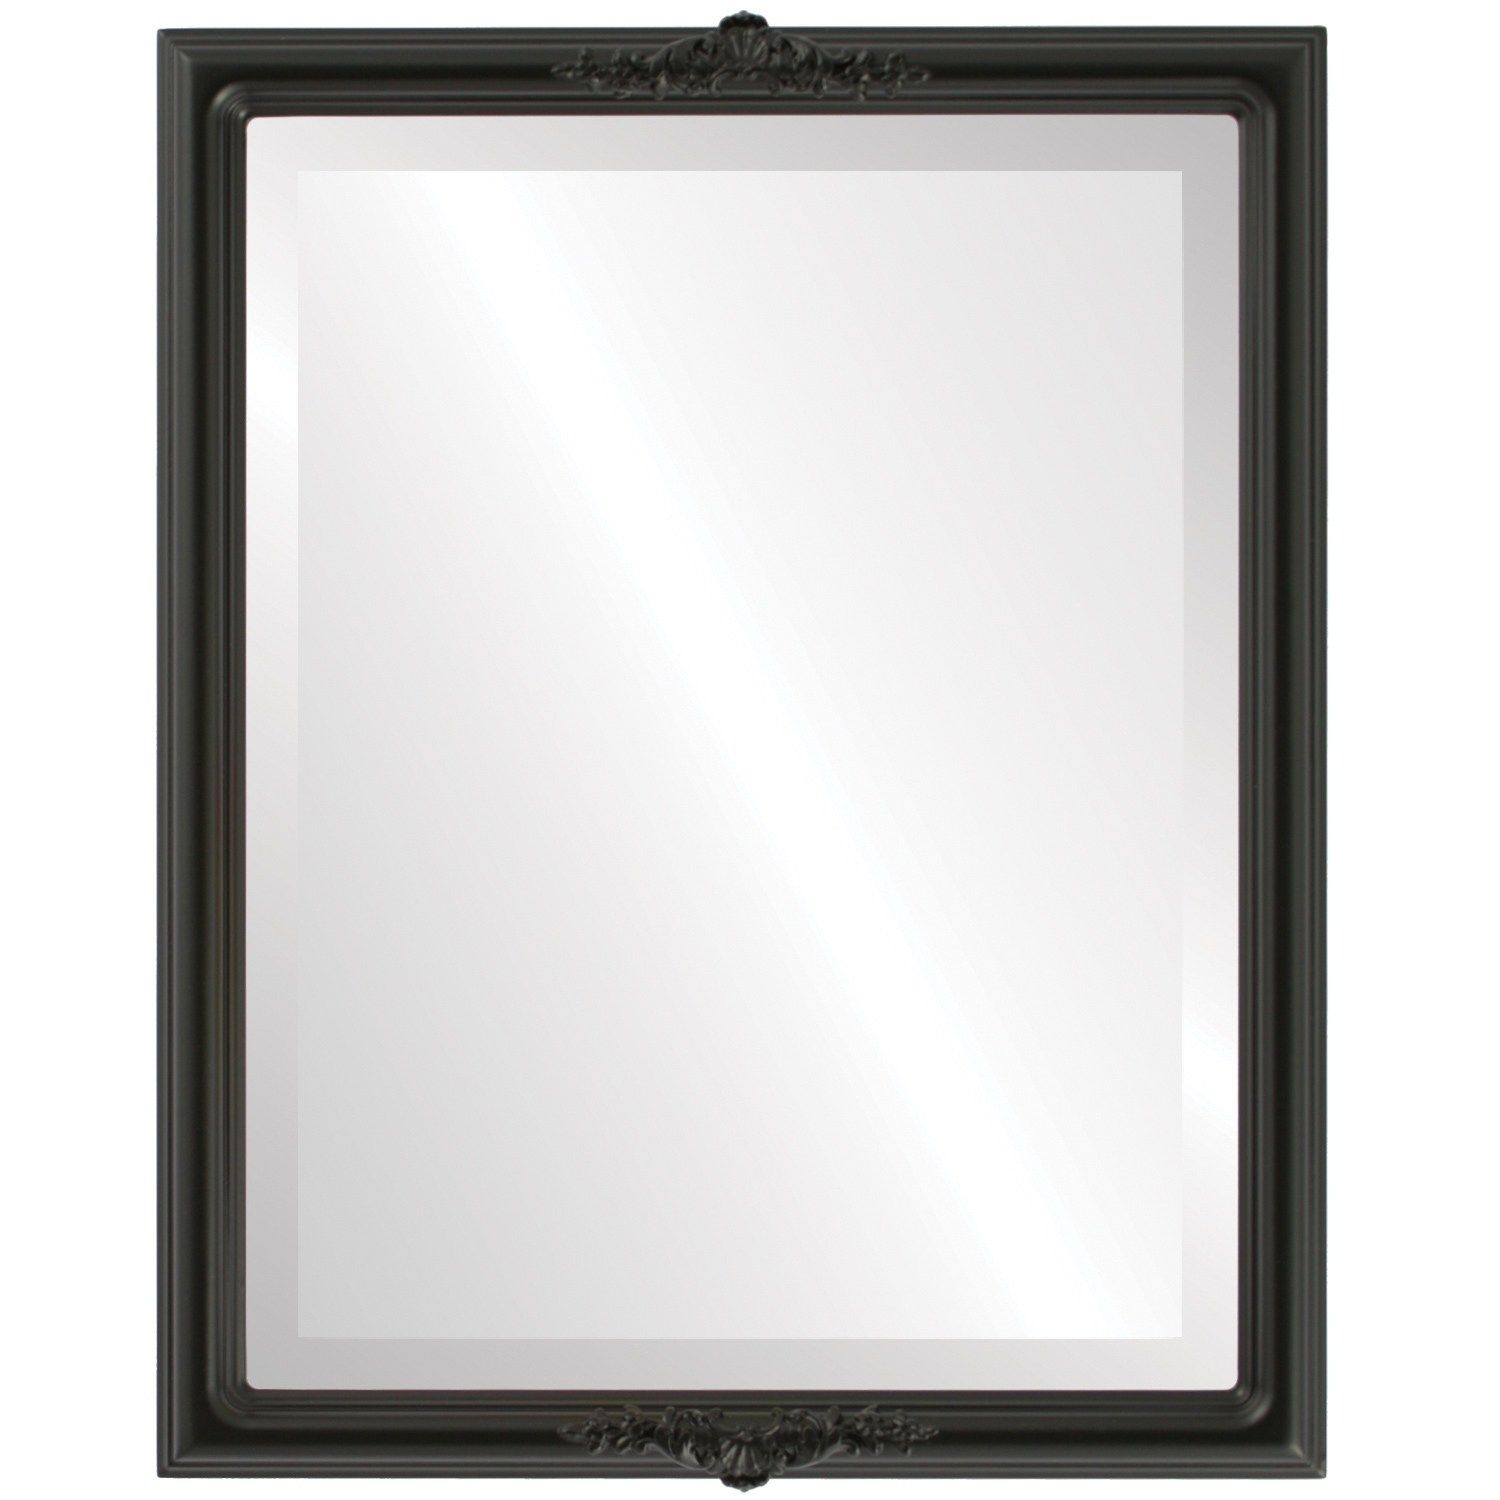 The Oval And Round Mirror Store Contessa Framed Rectangle Mirror In In Matte Black Rectangular Wall Mirrors (View 4 of 15)